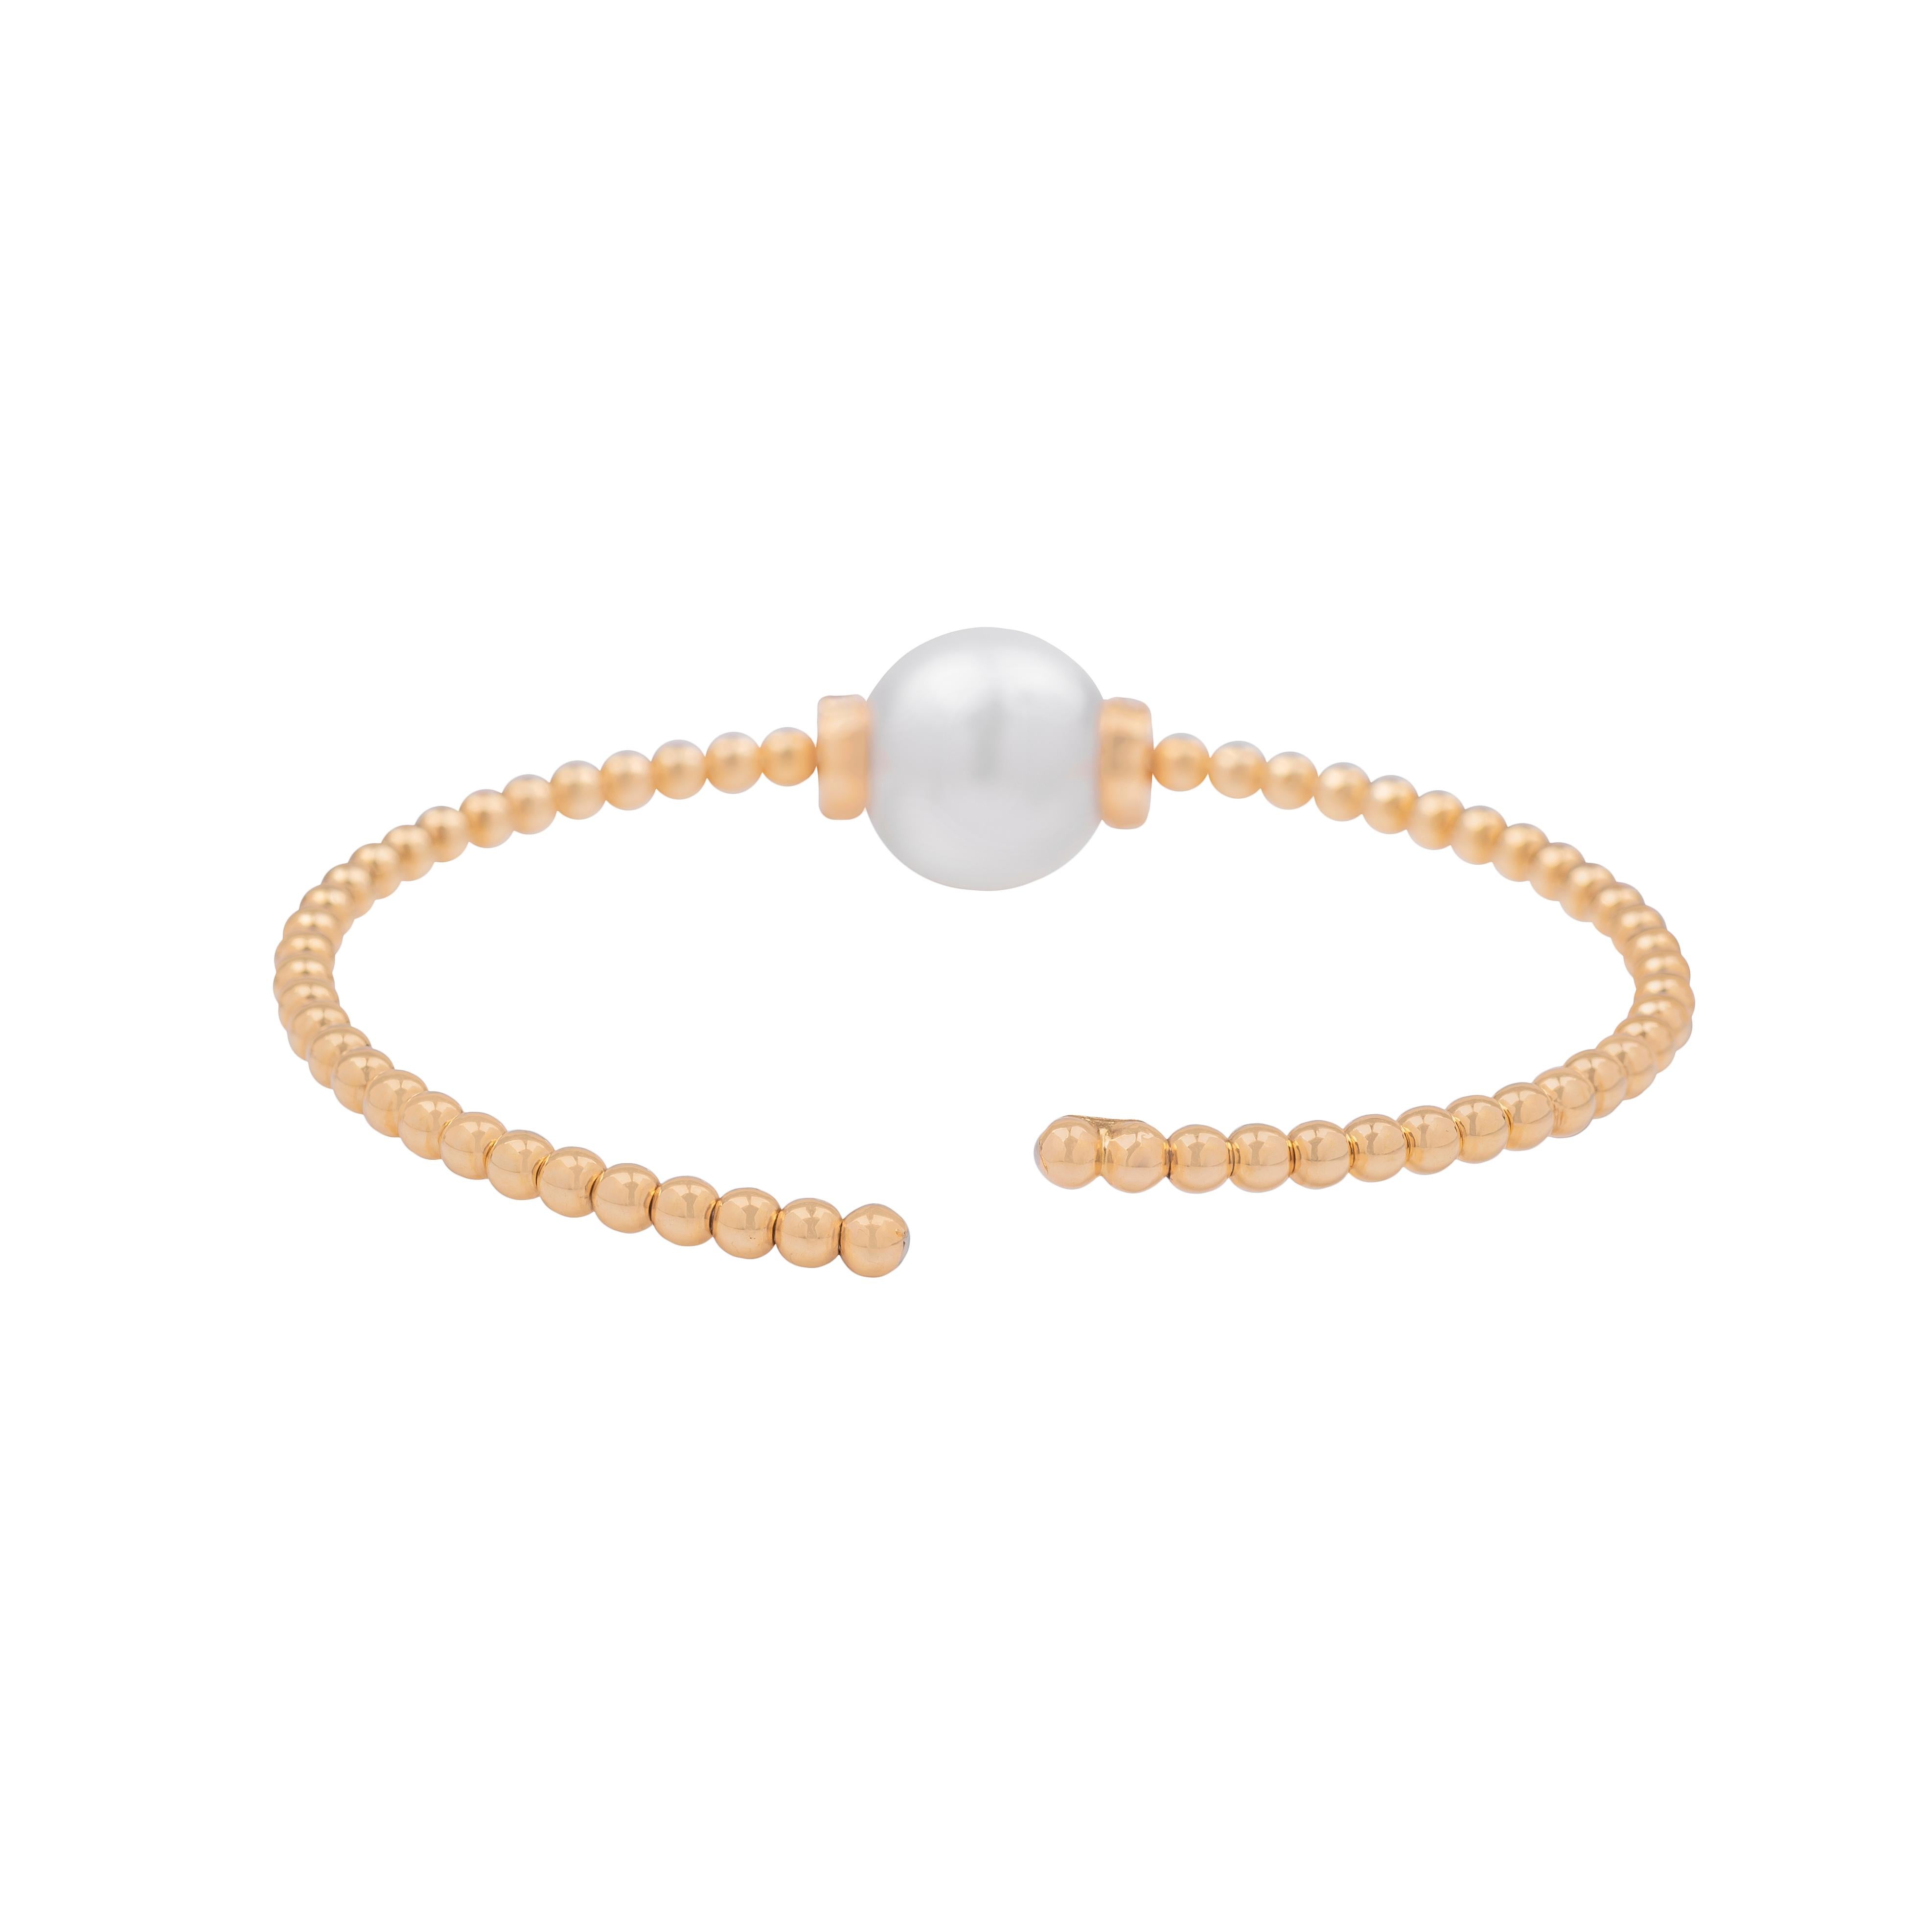 This bracelet is made in Italy by Coscia.
The frame is 18k gold and it features a pearl at the centre with a ring of white diamonds at both sides of it. The bracelet consists of 58 18k gold spheres.

Diamonds total content is 0.2ct
18k Gold total